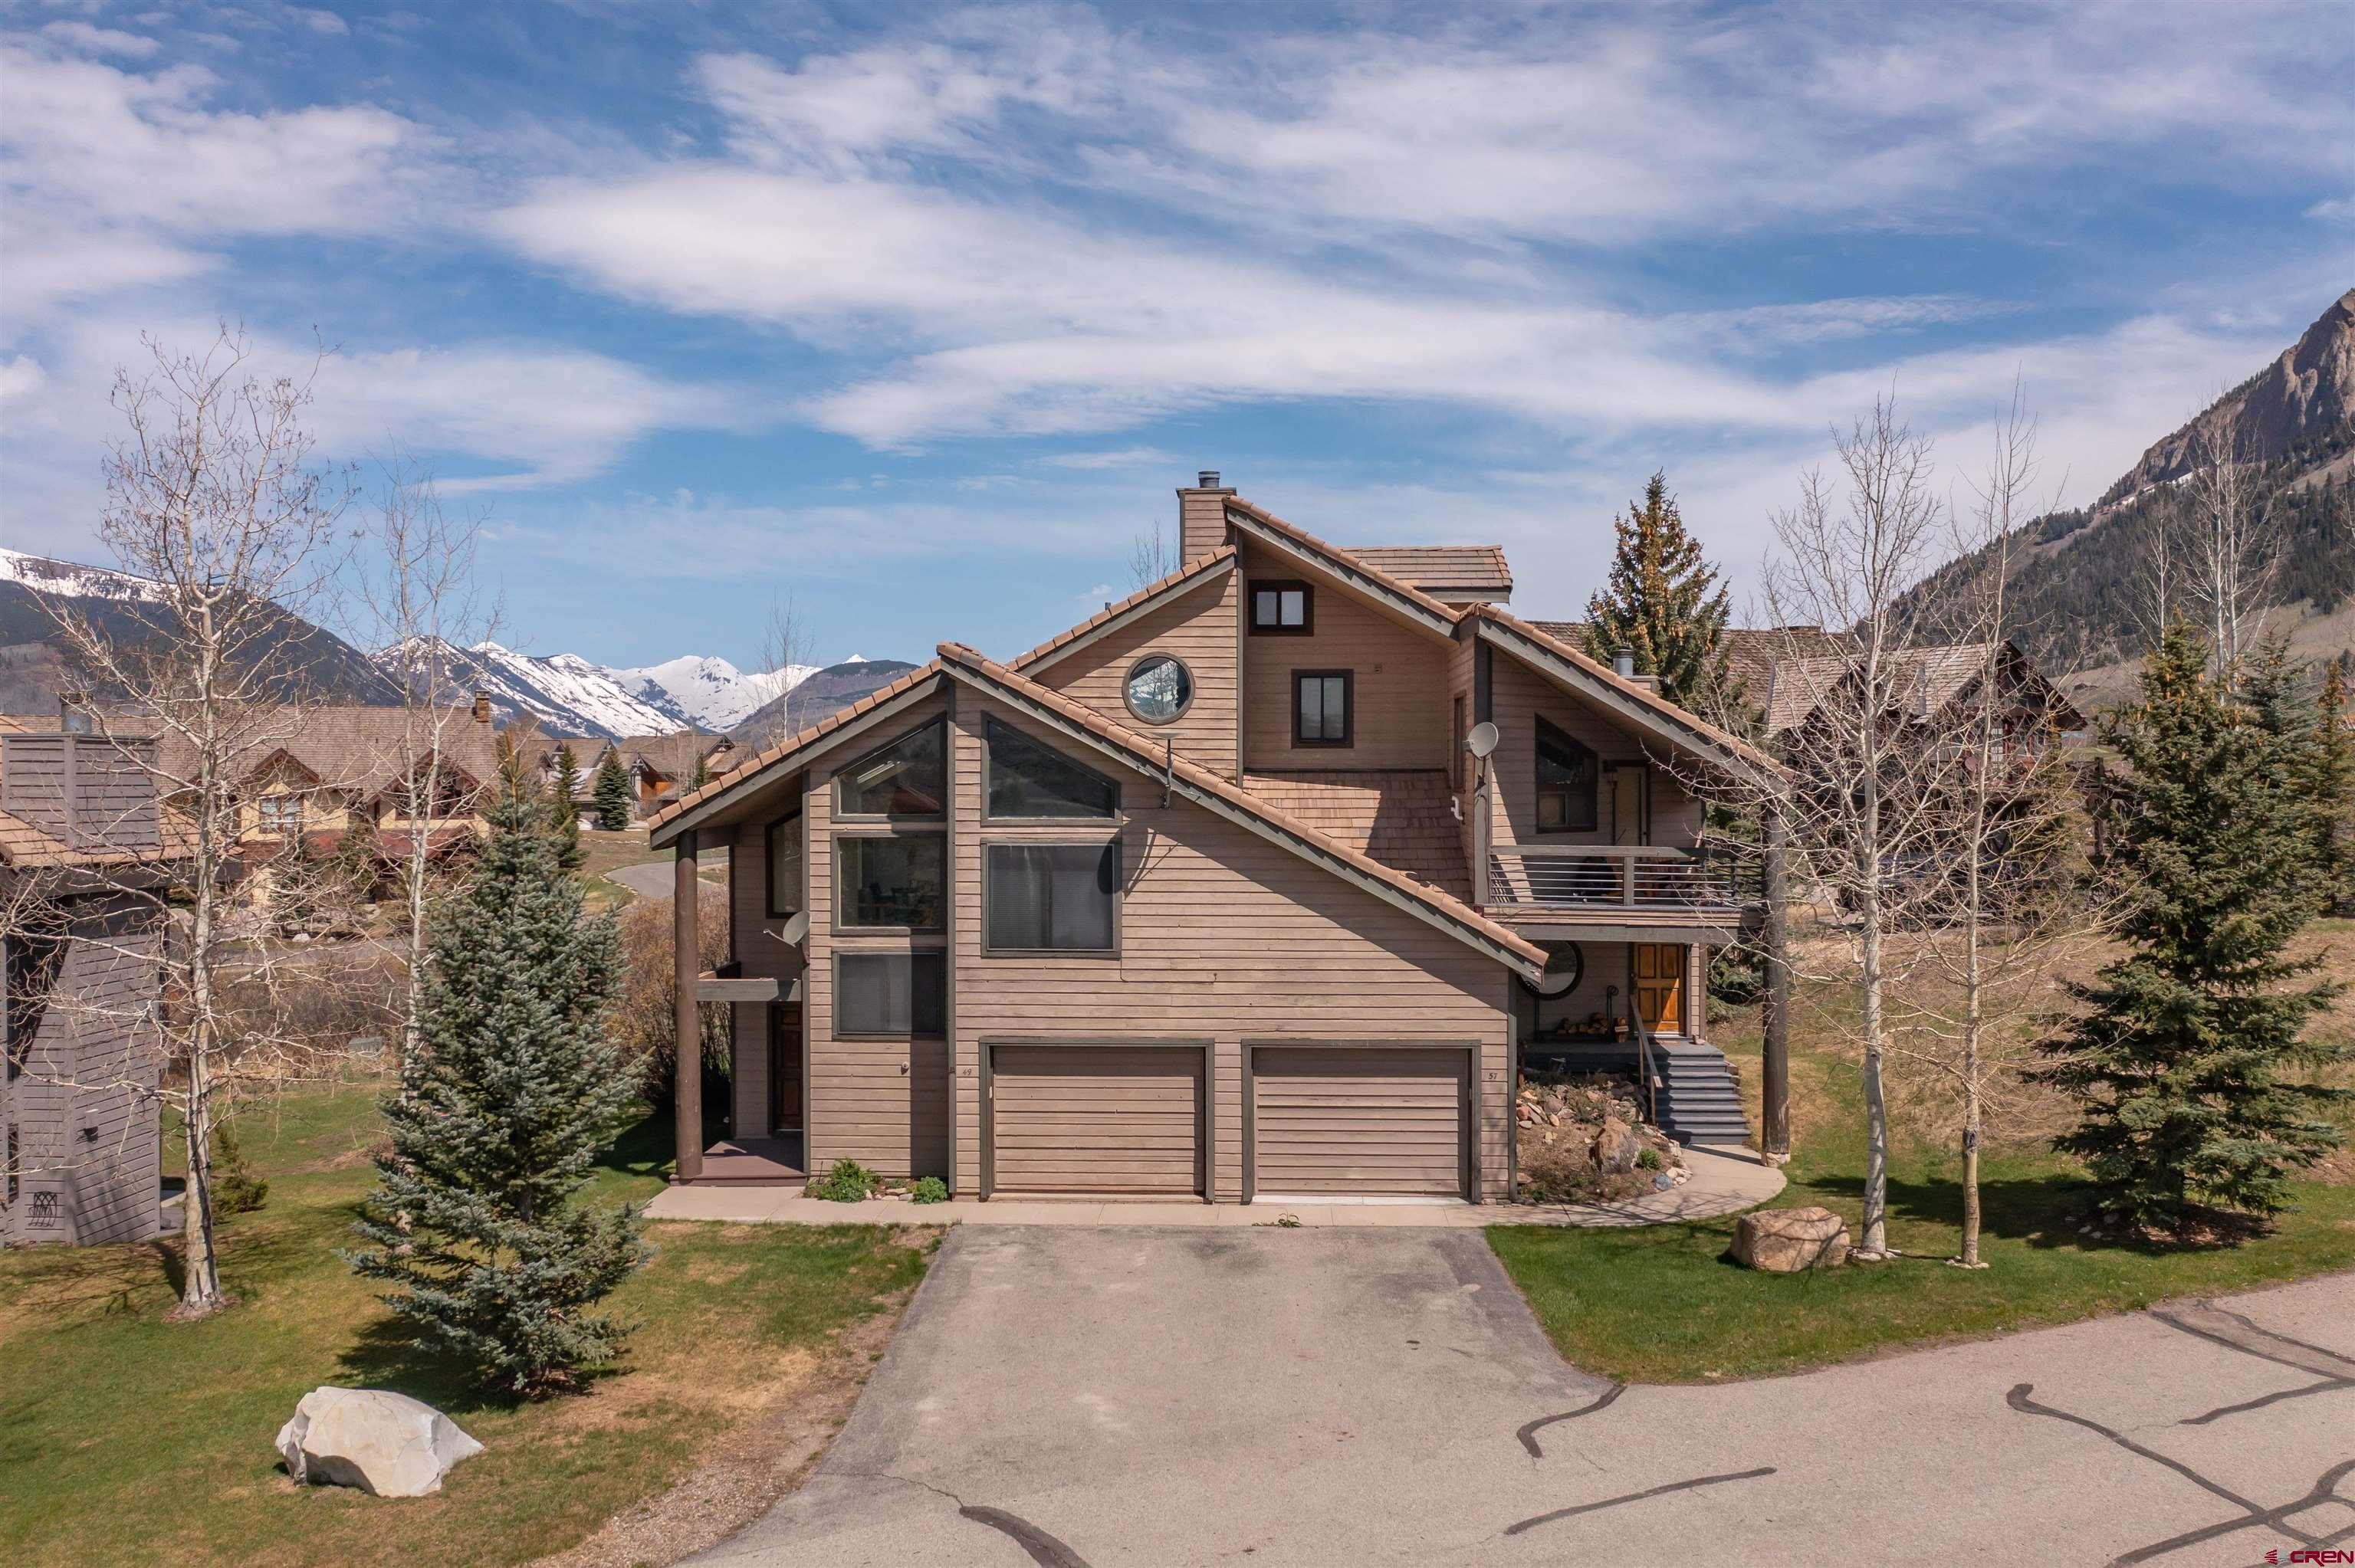 49 Powderview Drive, Crested Butte, CO 81224